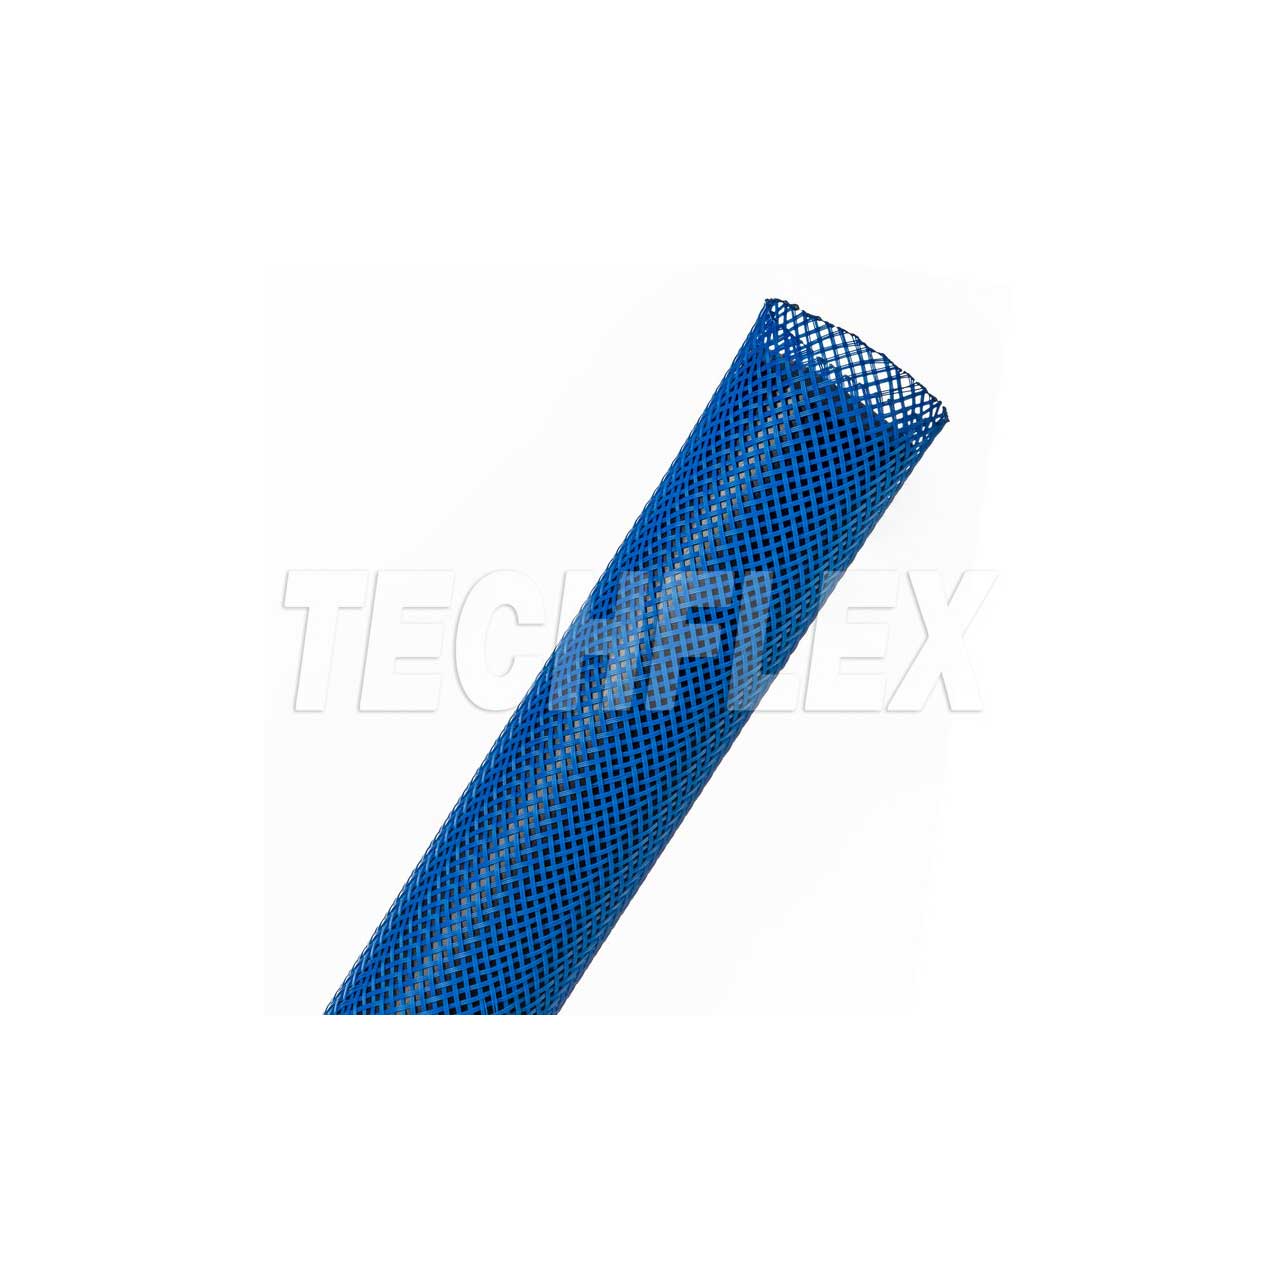 Techflex PTN1.00NB General Purpose Expandable Braided Cable Sleeving - 1 Inch - Neon Blue - 250 Foot PTN1.00NB 250 FOOT